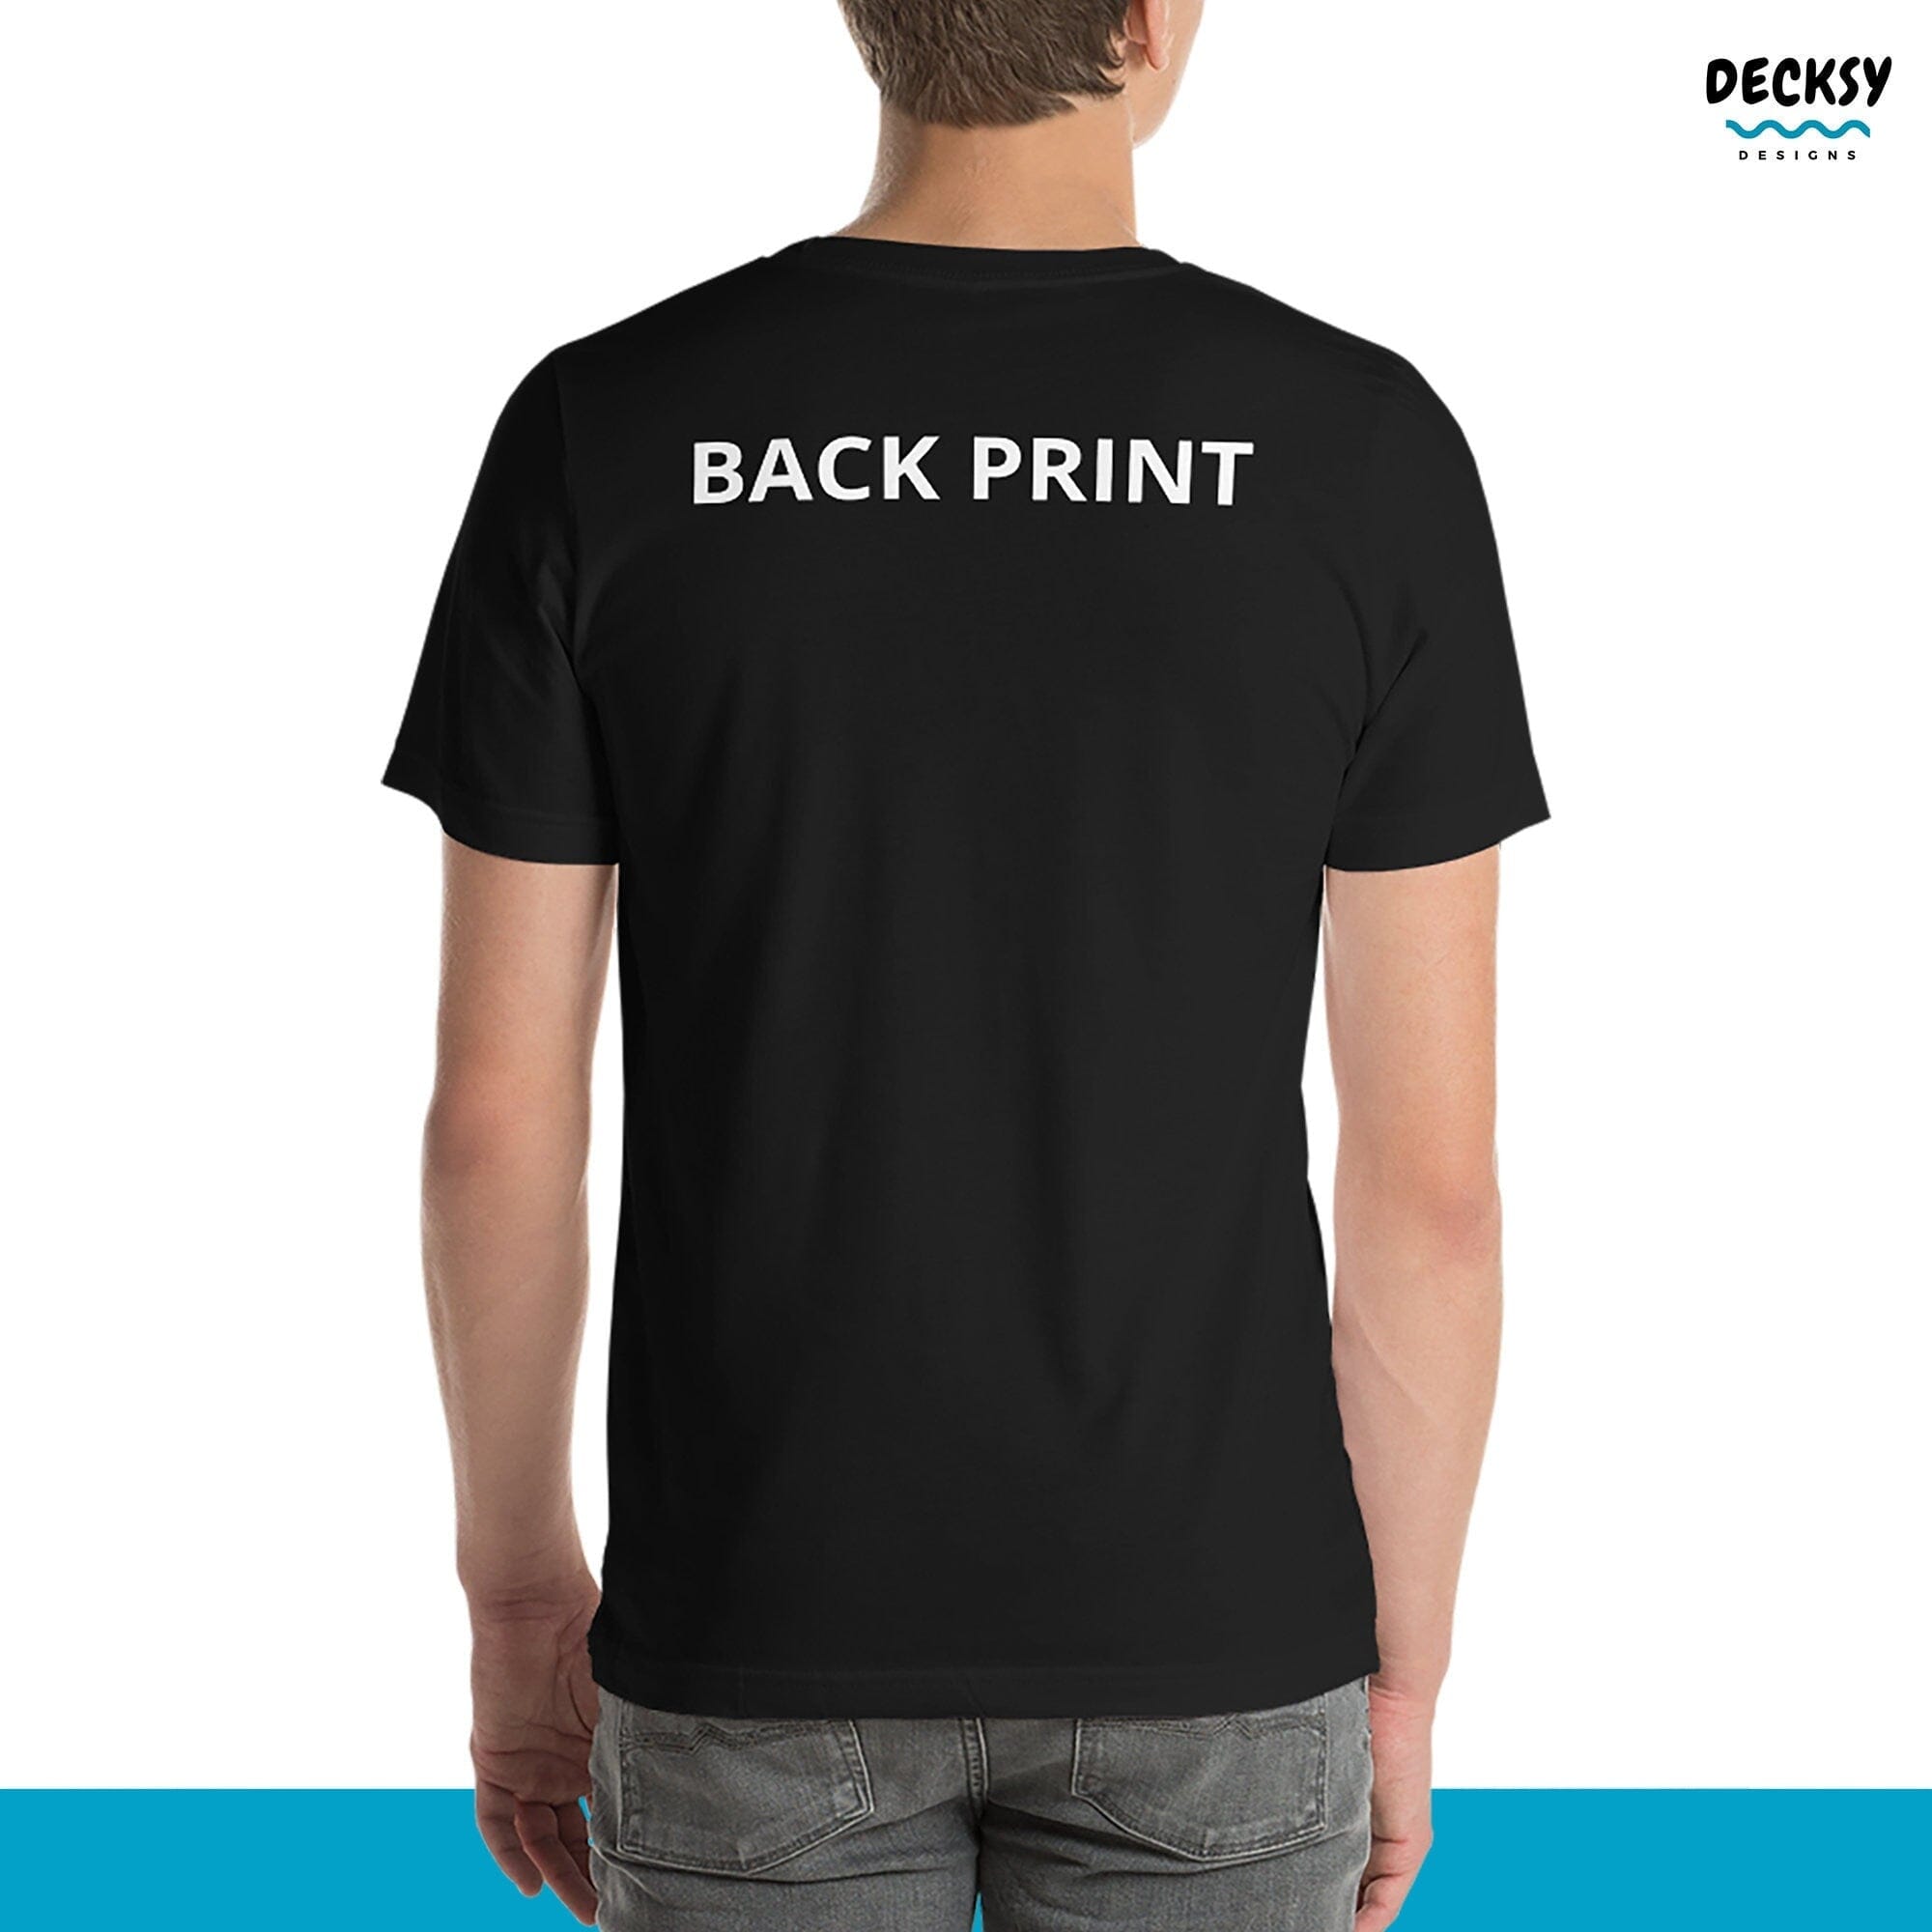 Additional Back Print Custom Unisex Shirt, Jumper, Hoodie, Gift for-Clothing:Gender-Neutral Adult Clothing:Tops & Tees:T-shirts:Graphic Tees-DecksyDesigns